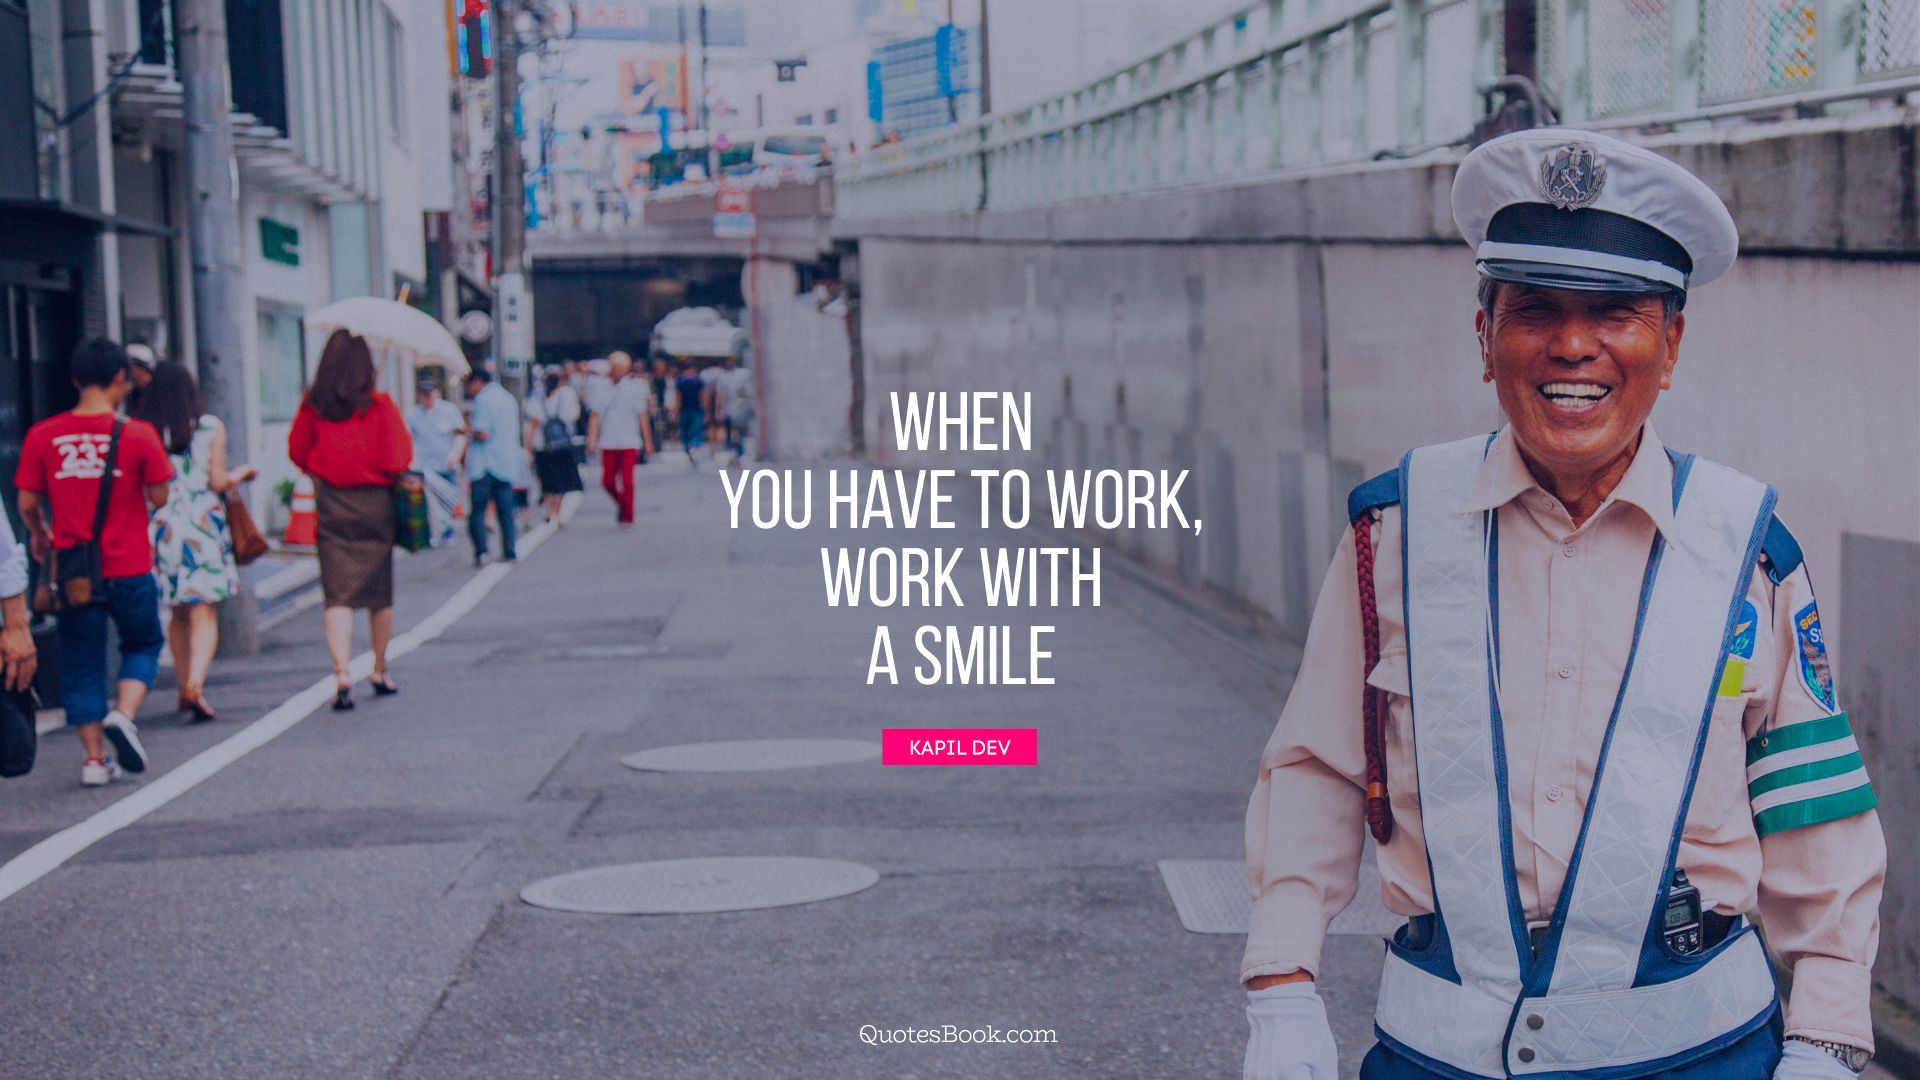 When you have to work, work with a smile. - Quote by Kapil Dev